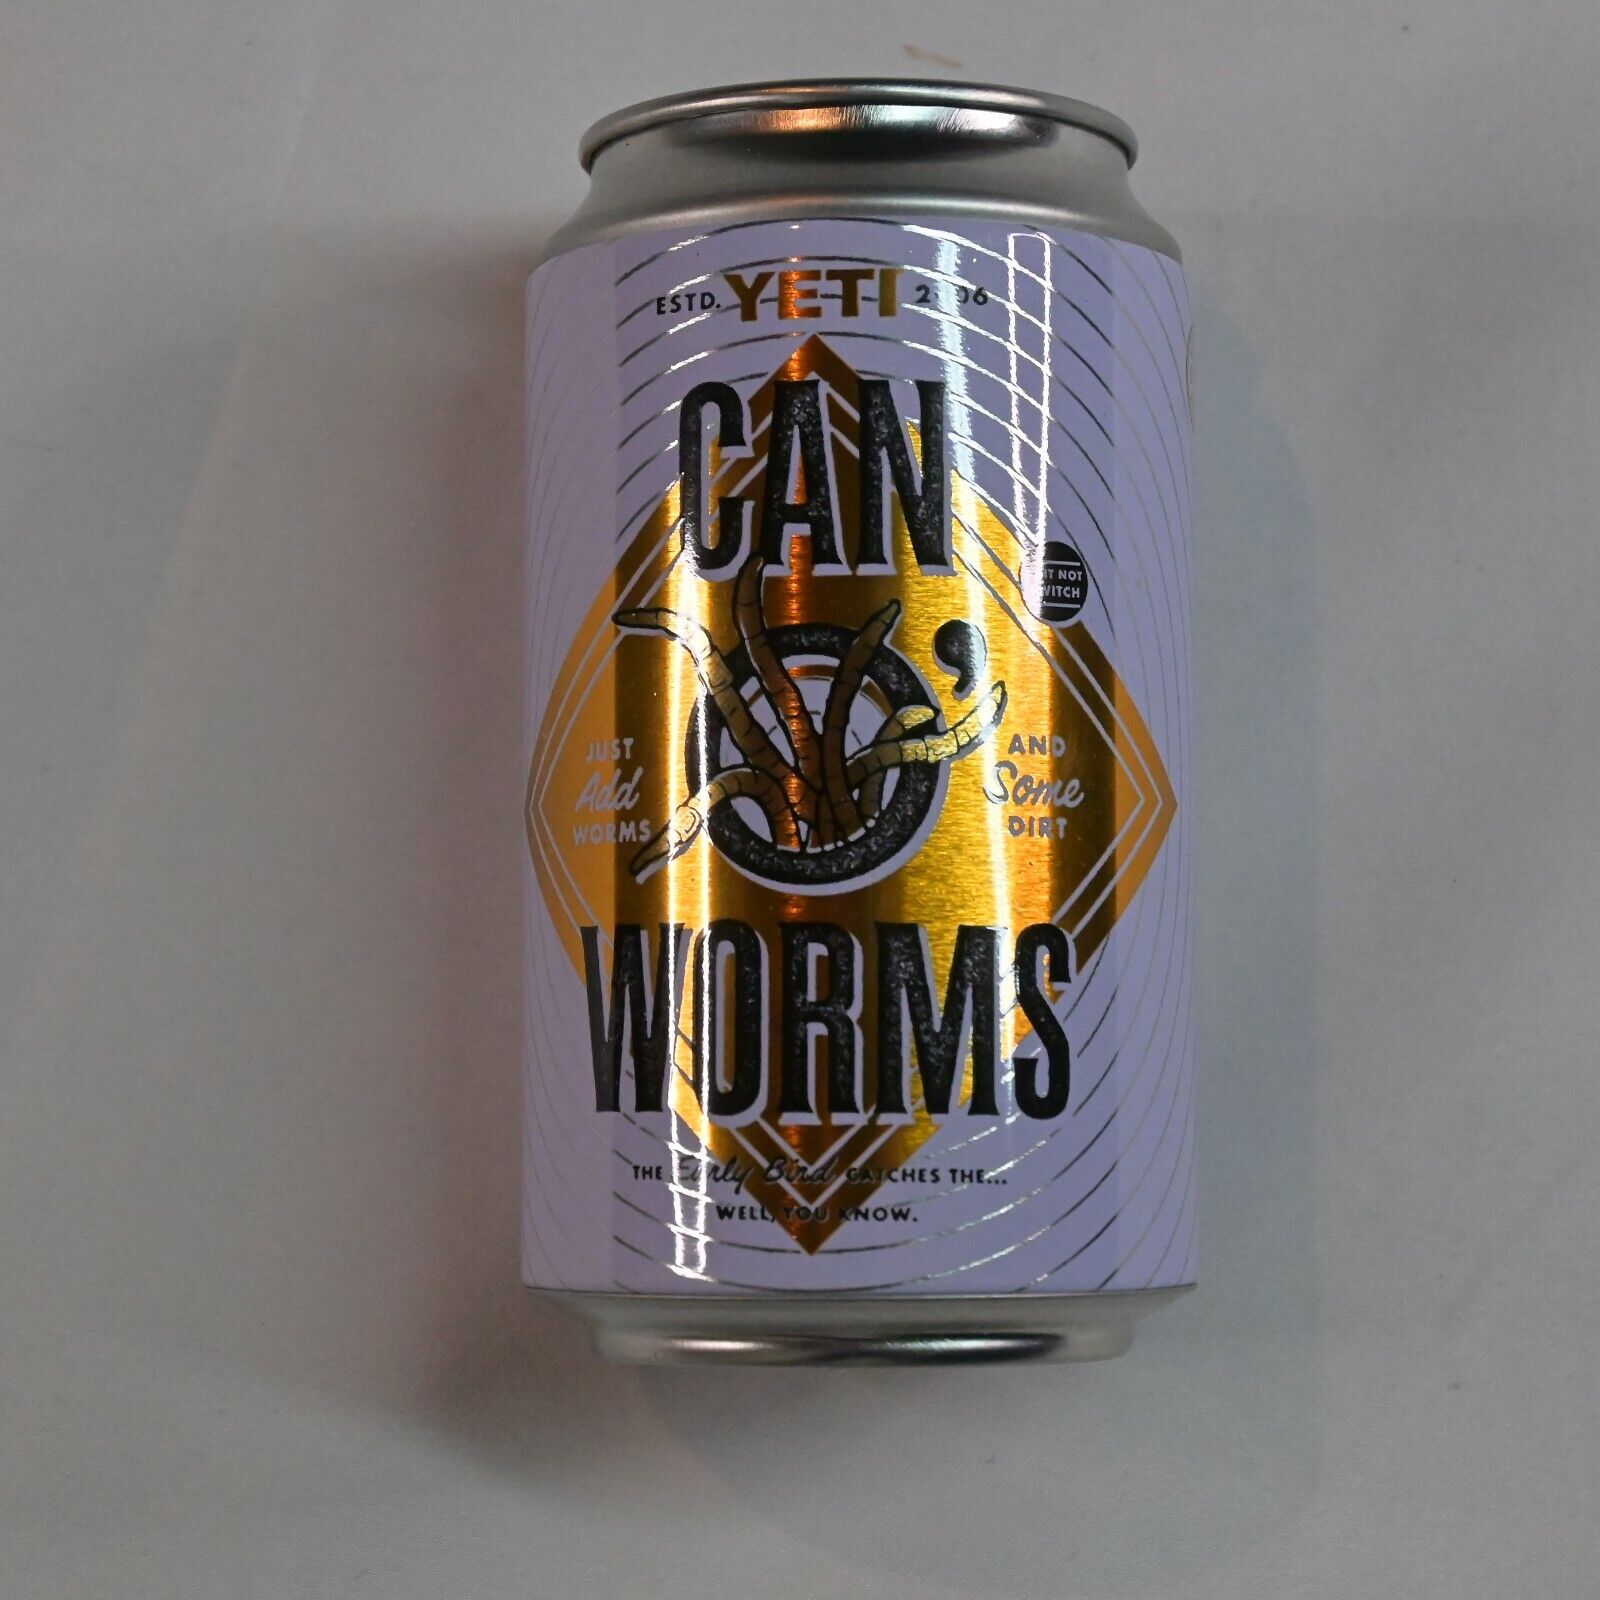 NEW YETI Can of Worms Stash Metal Can Limited Edition Conceal Your Treasures